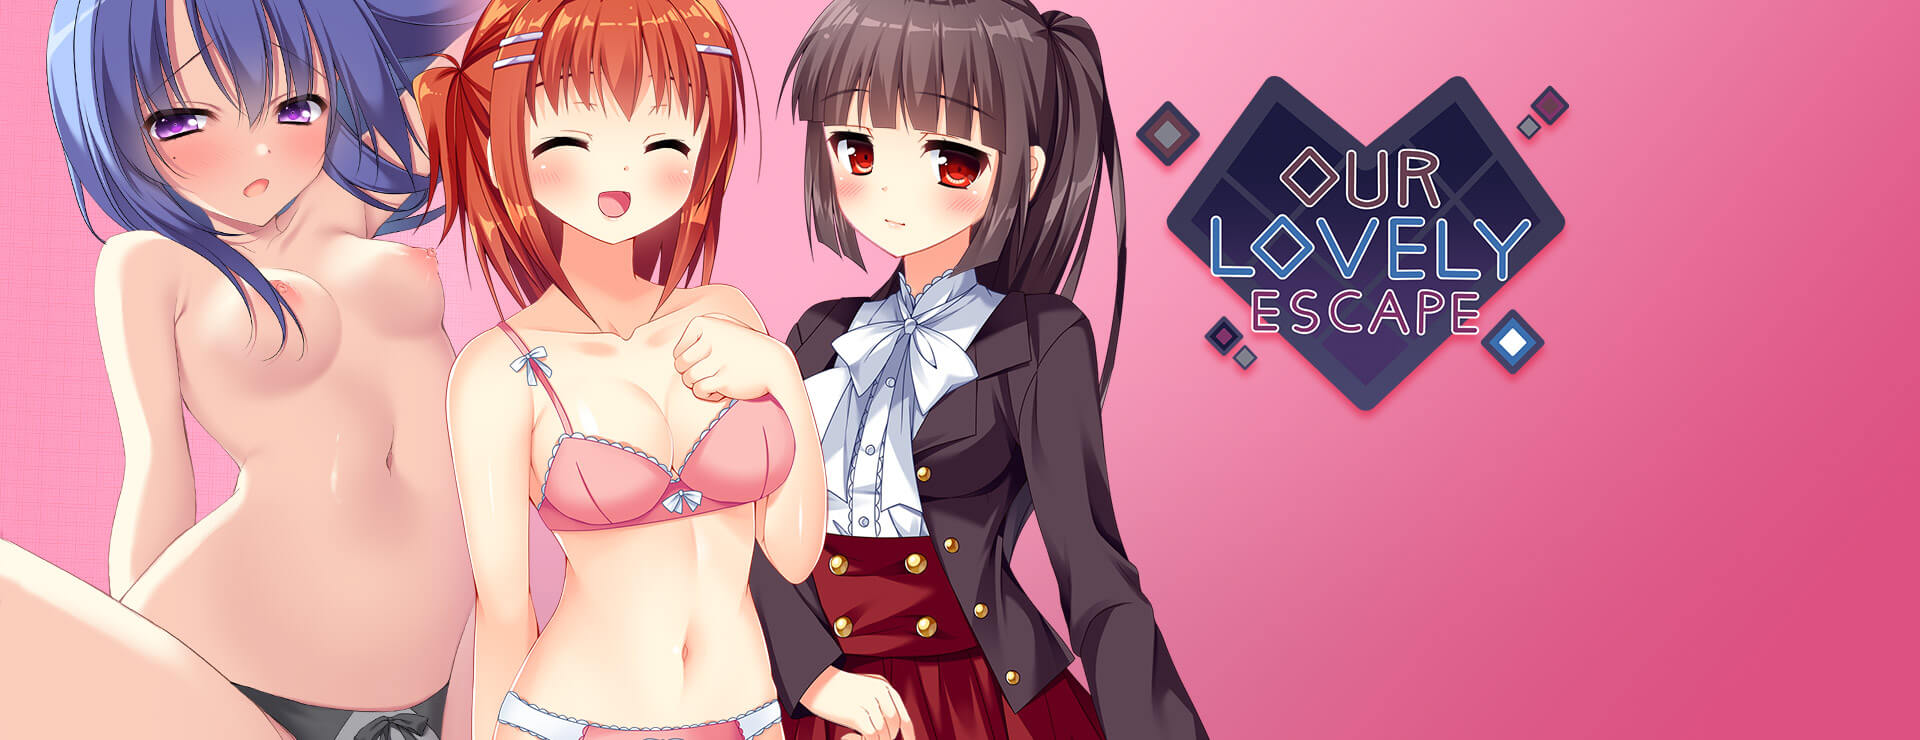 Our Lovely Escape - Visual Novel Game